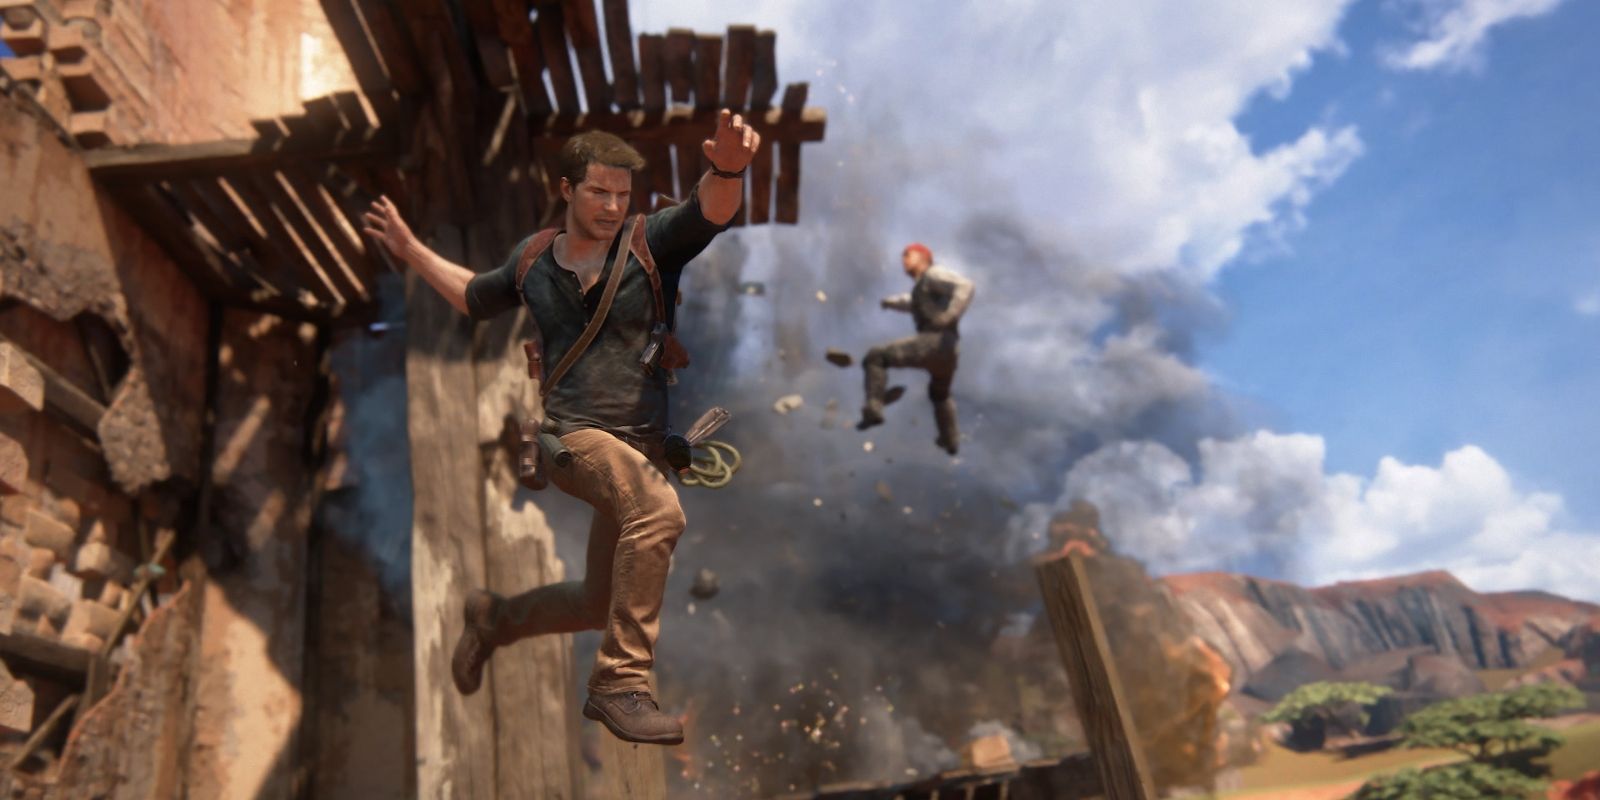 Nathan Drake leaping from a collapsing building in Uncharted 4